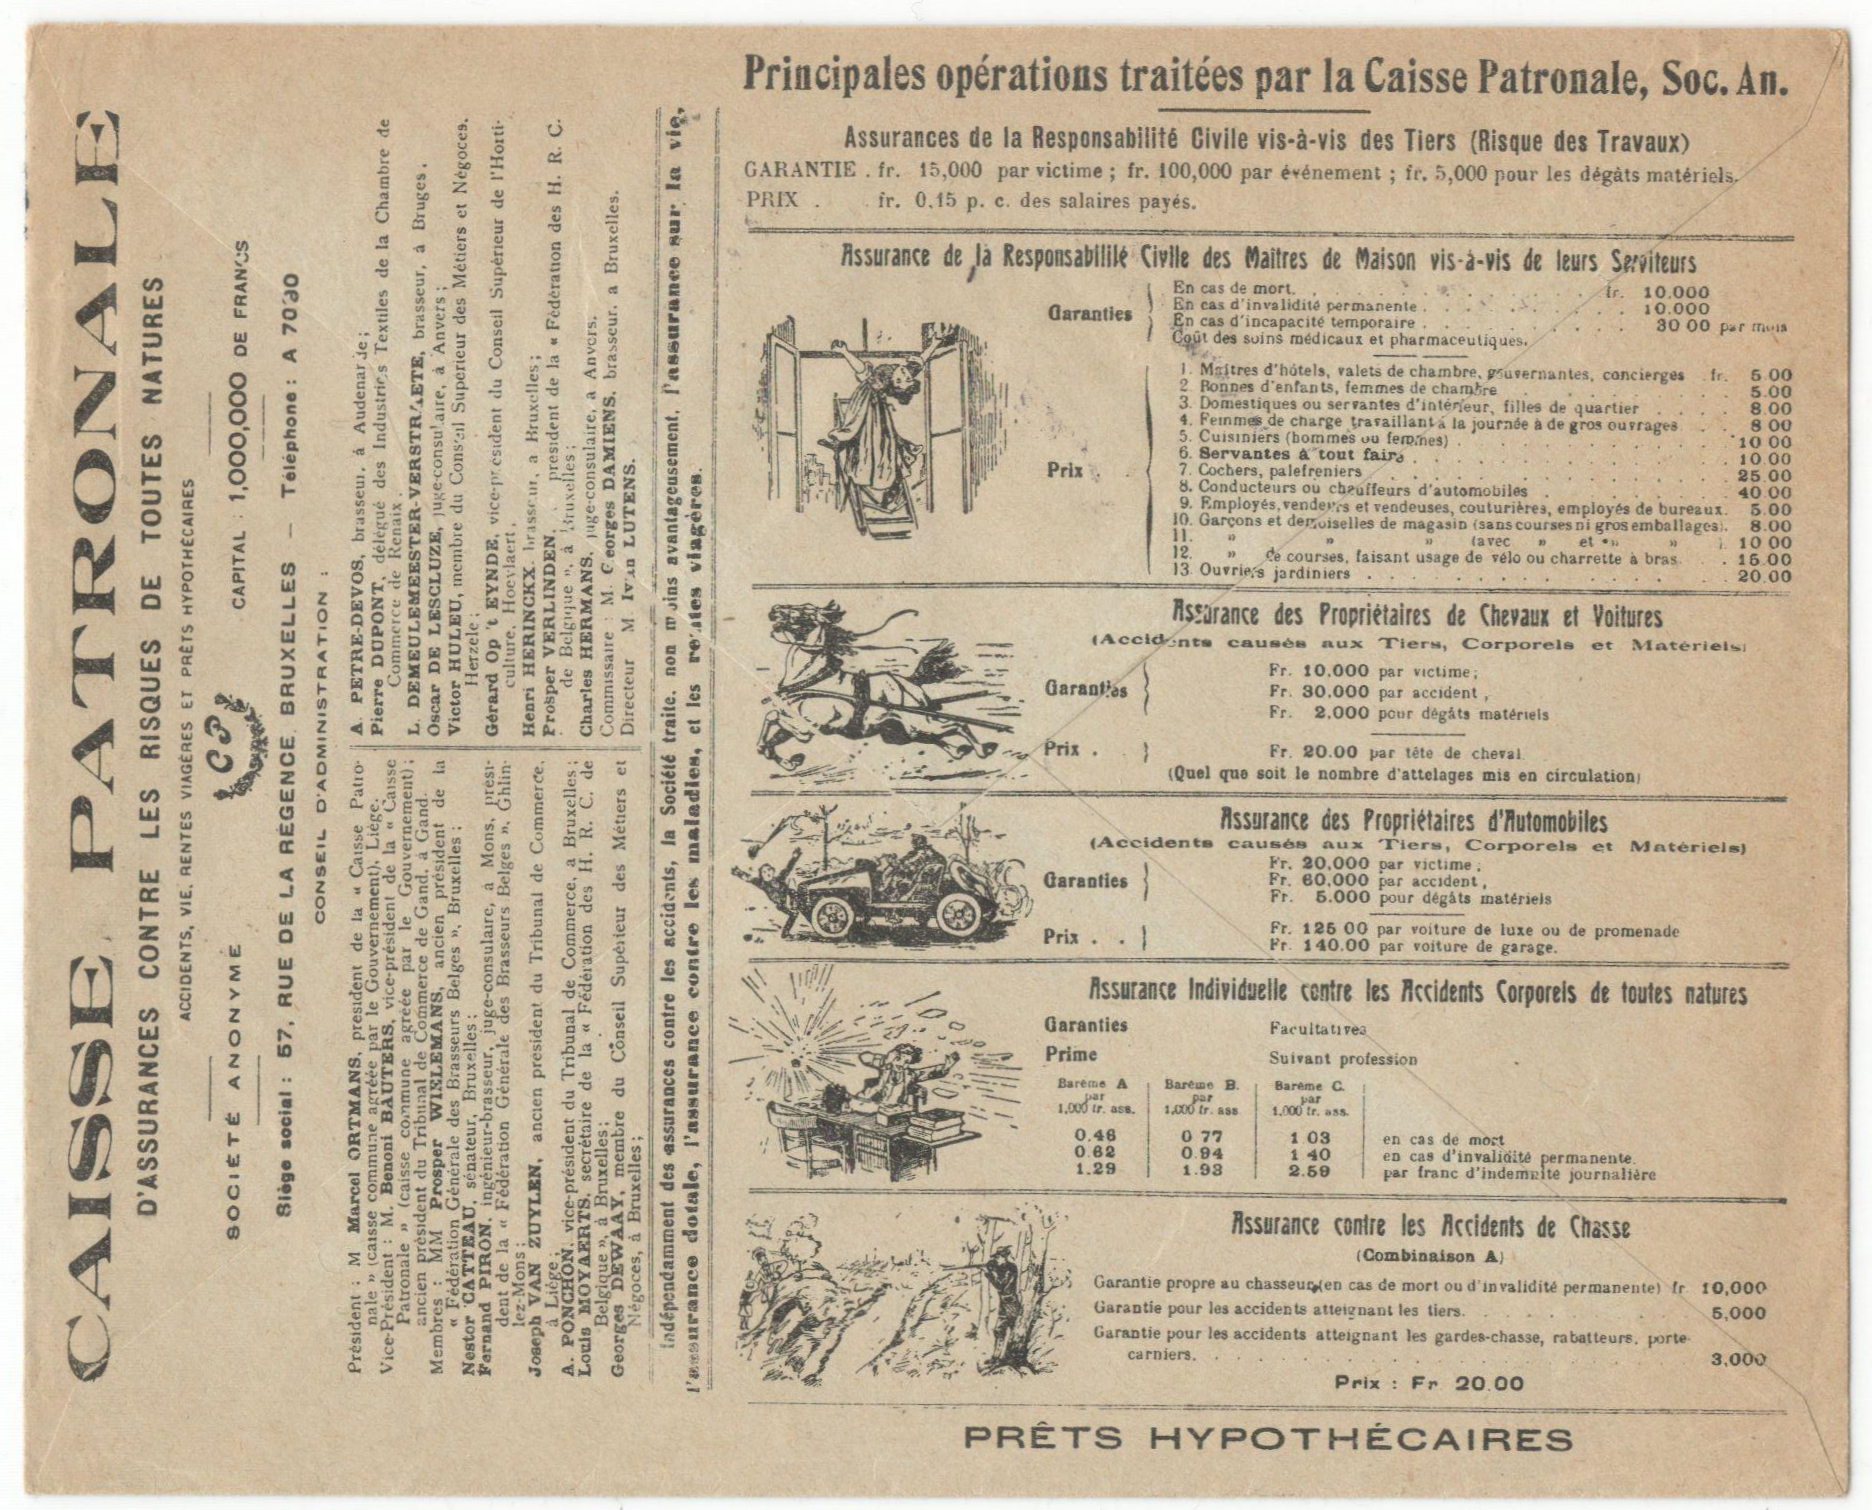 1917 ADVERTISING COVER FOR CAISSE PATRONALE